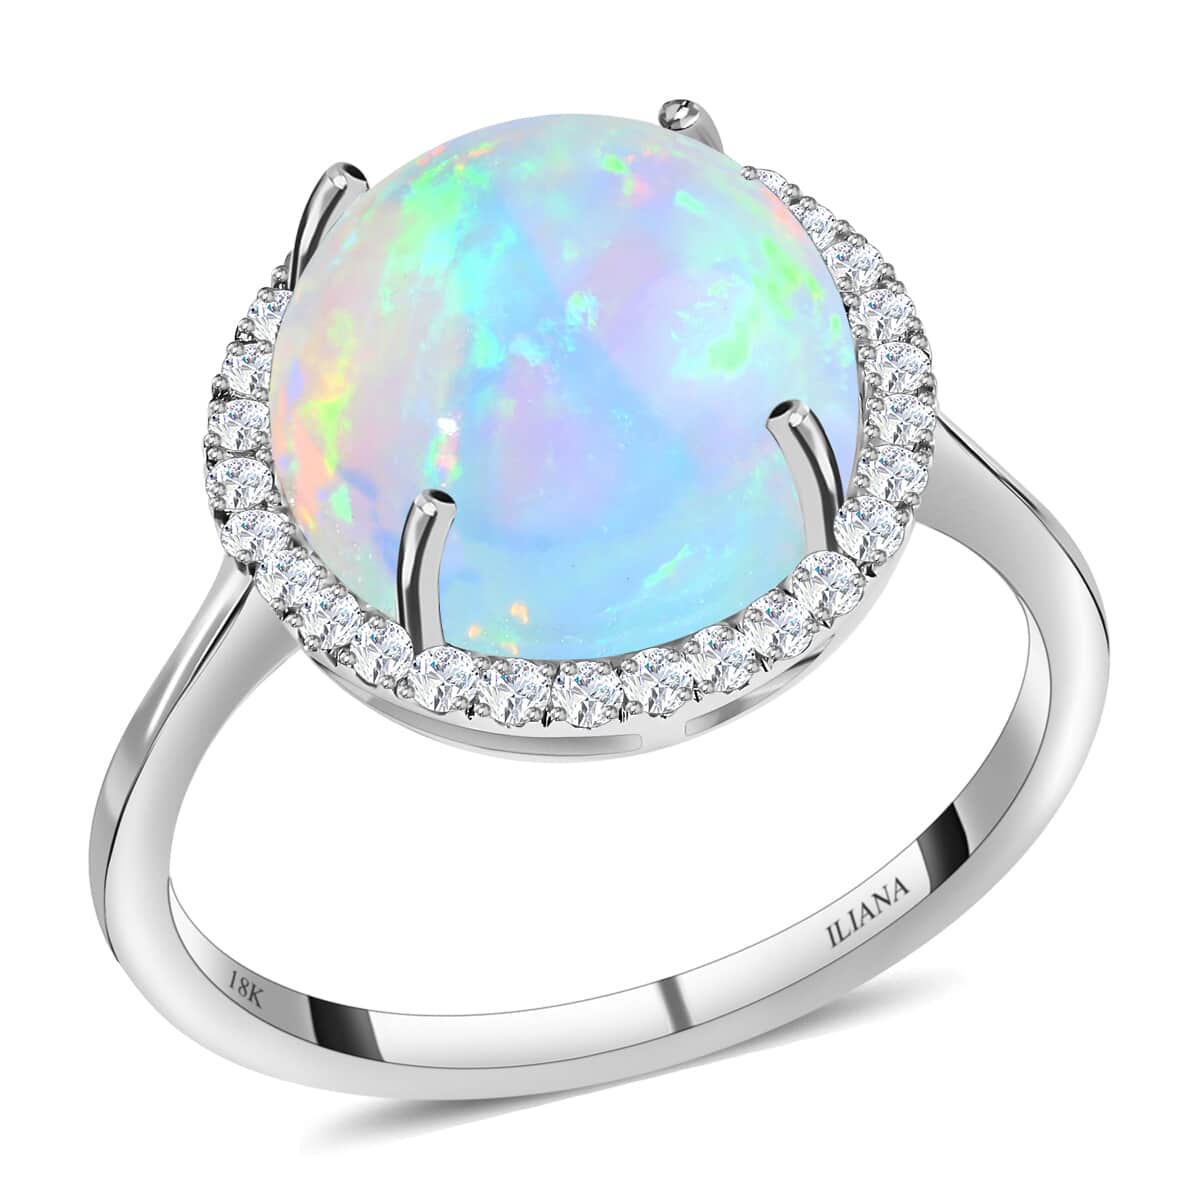 Inspired by a halo design, this AAA Ethiopian Welo Opal ring symbolizes sanctity and perfection. Halo rings are popular throughout history for their uniqueness in illuminating the gemstone i image number 0